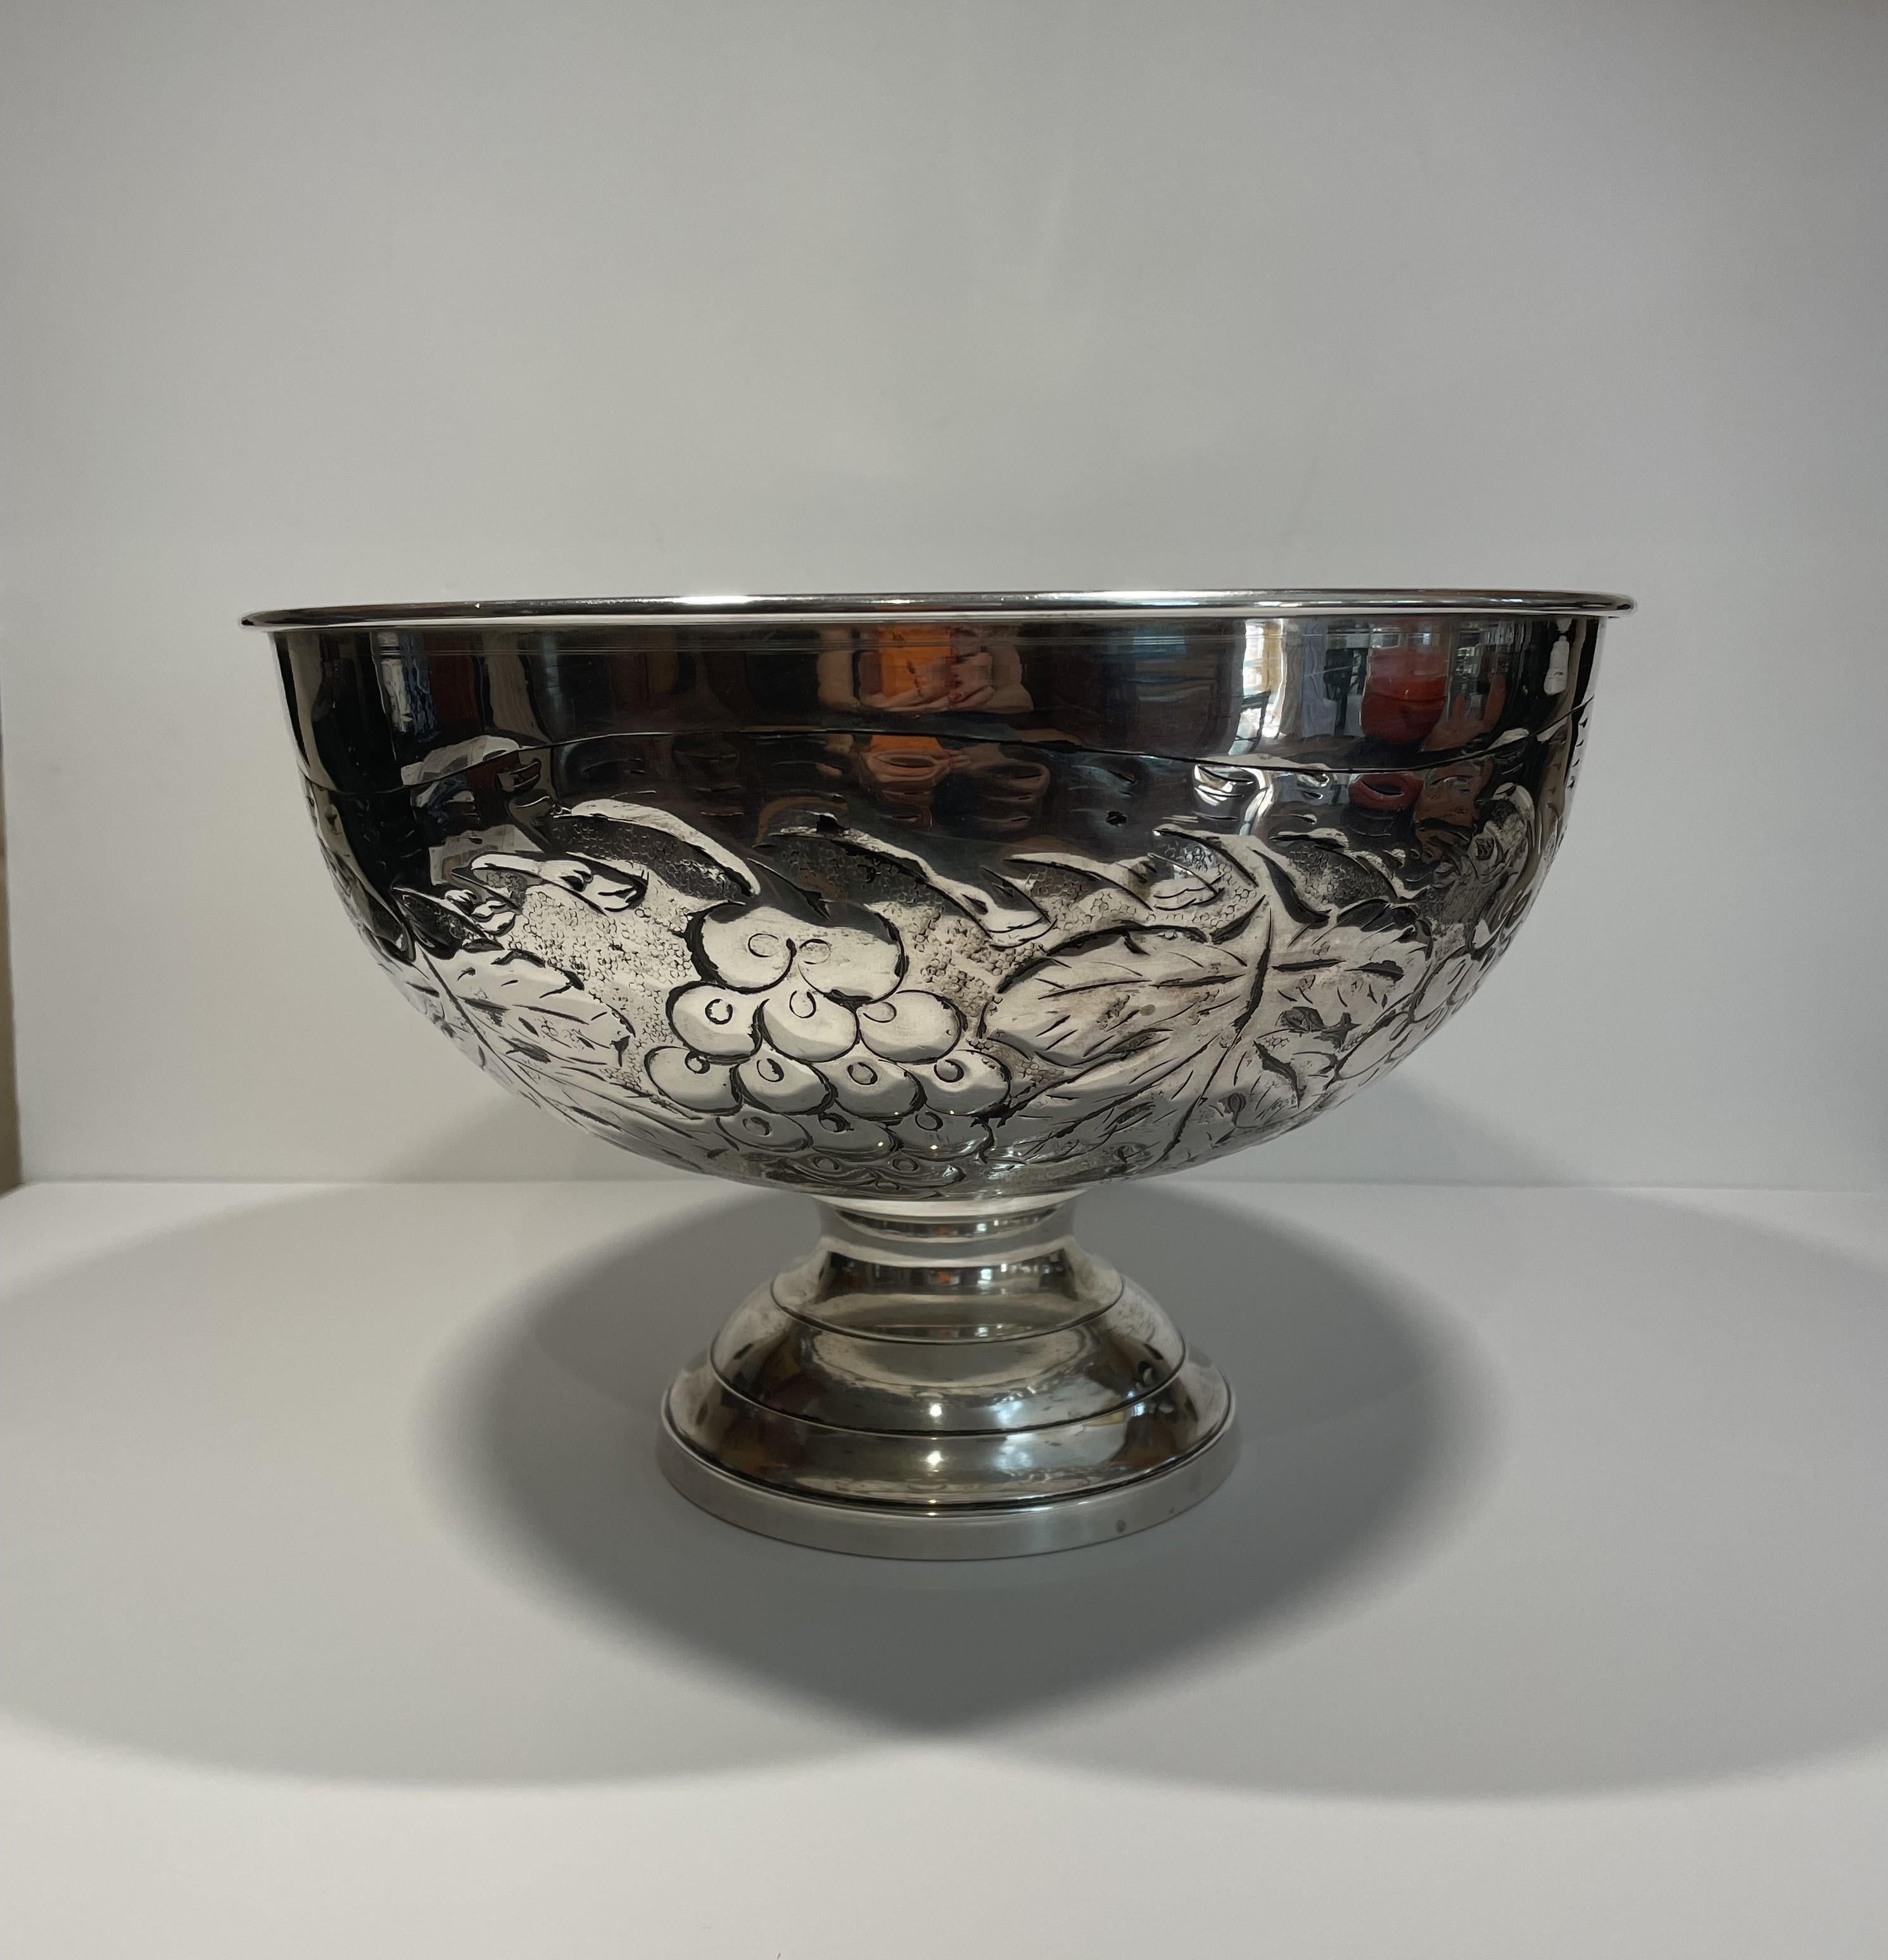 Baroque Revival Large Artisan-Crafted Silver Urns - A Pair For Sale